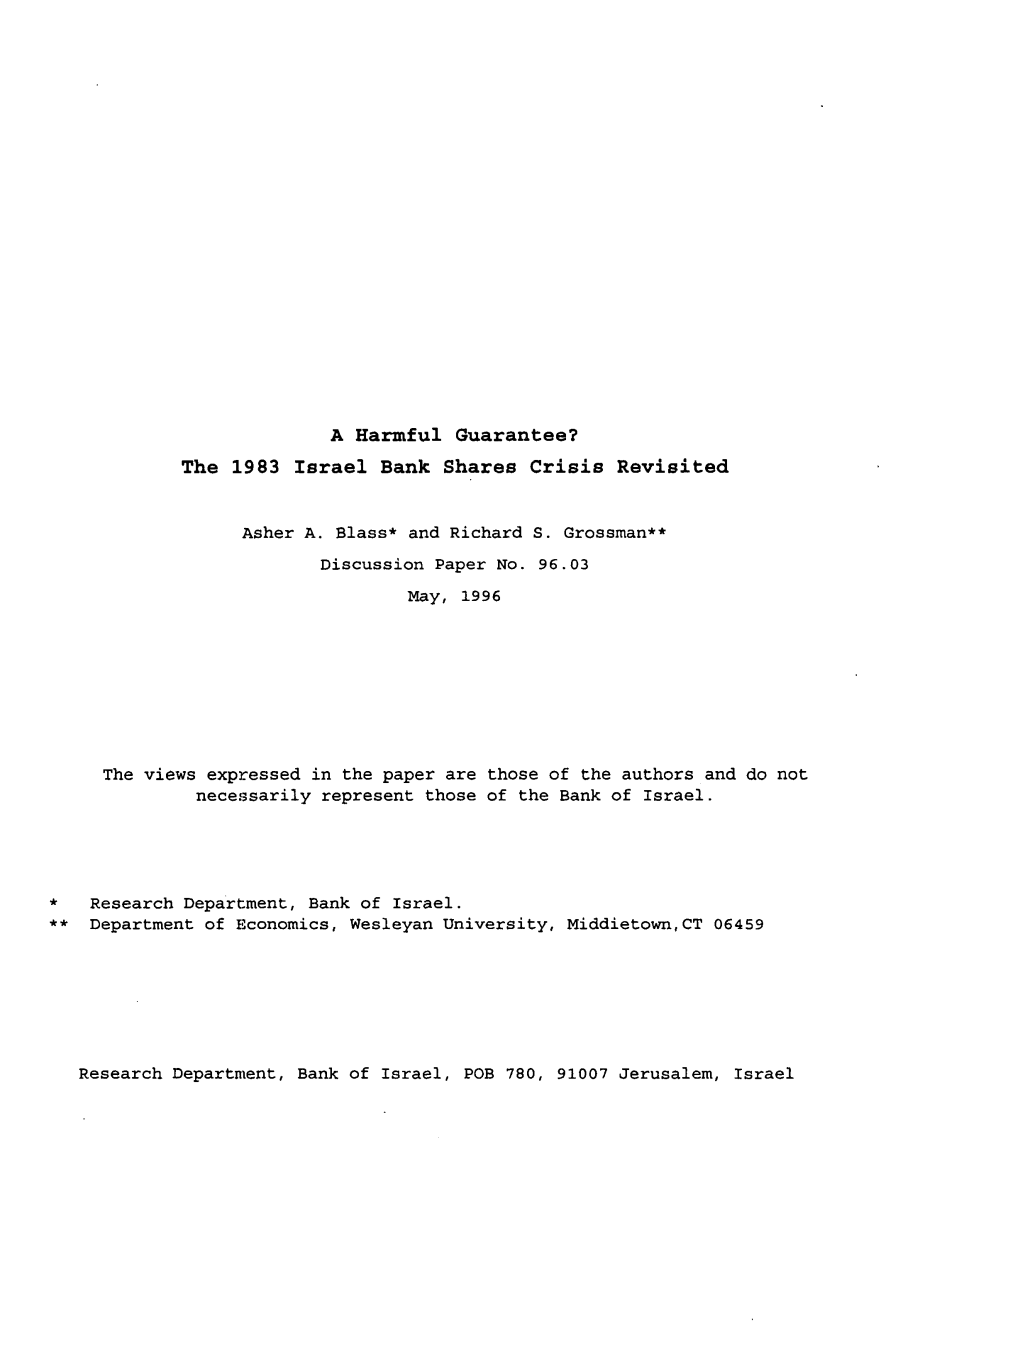 The 1983 Israel Bank Shares Crisis Revisited Discussion Paper No